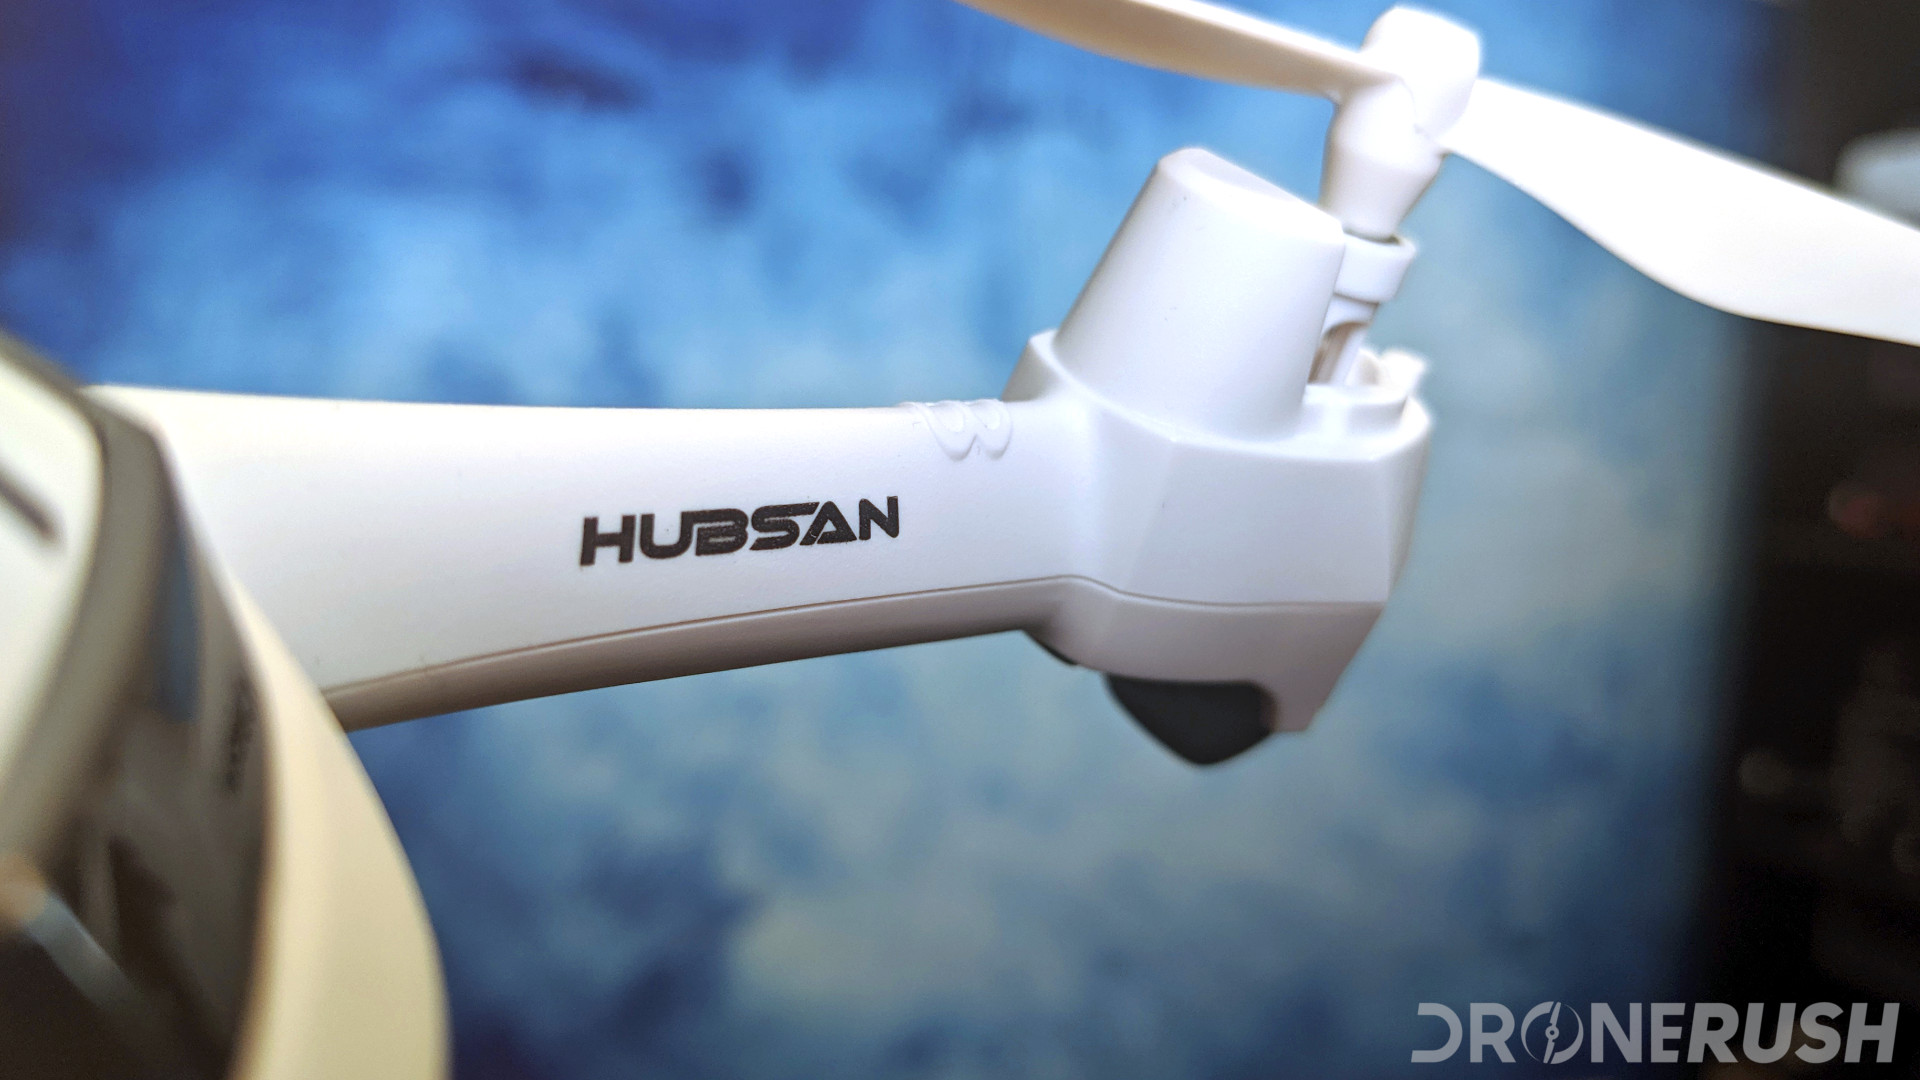 Hubsan drones guide - drones at their best - Drone